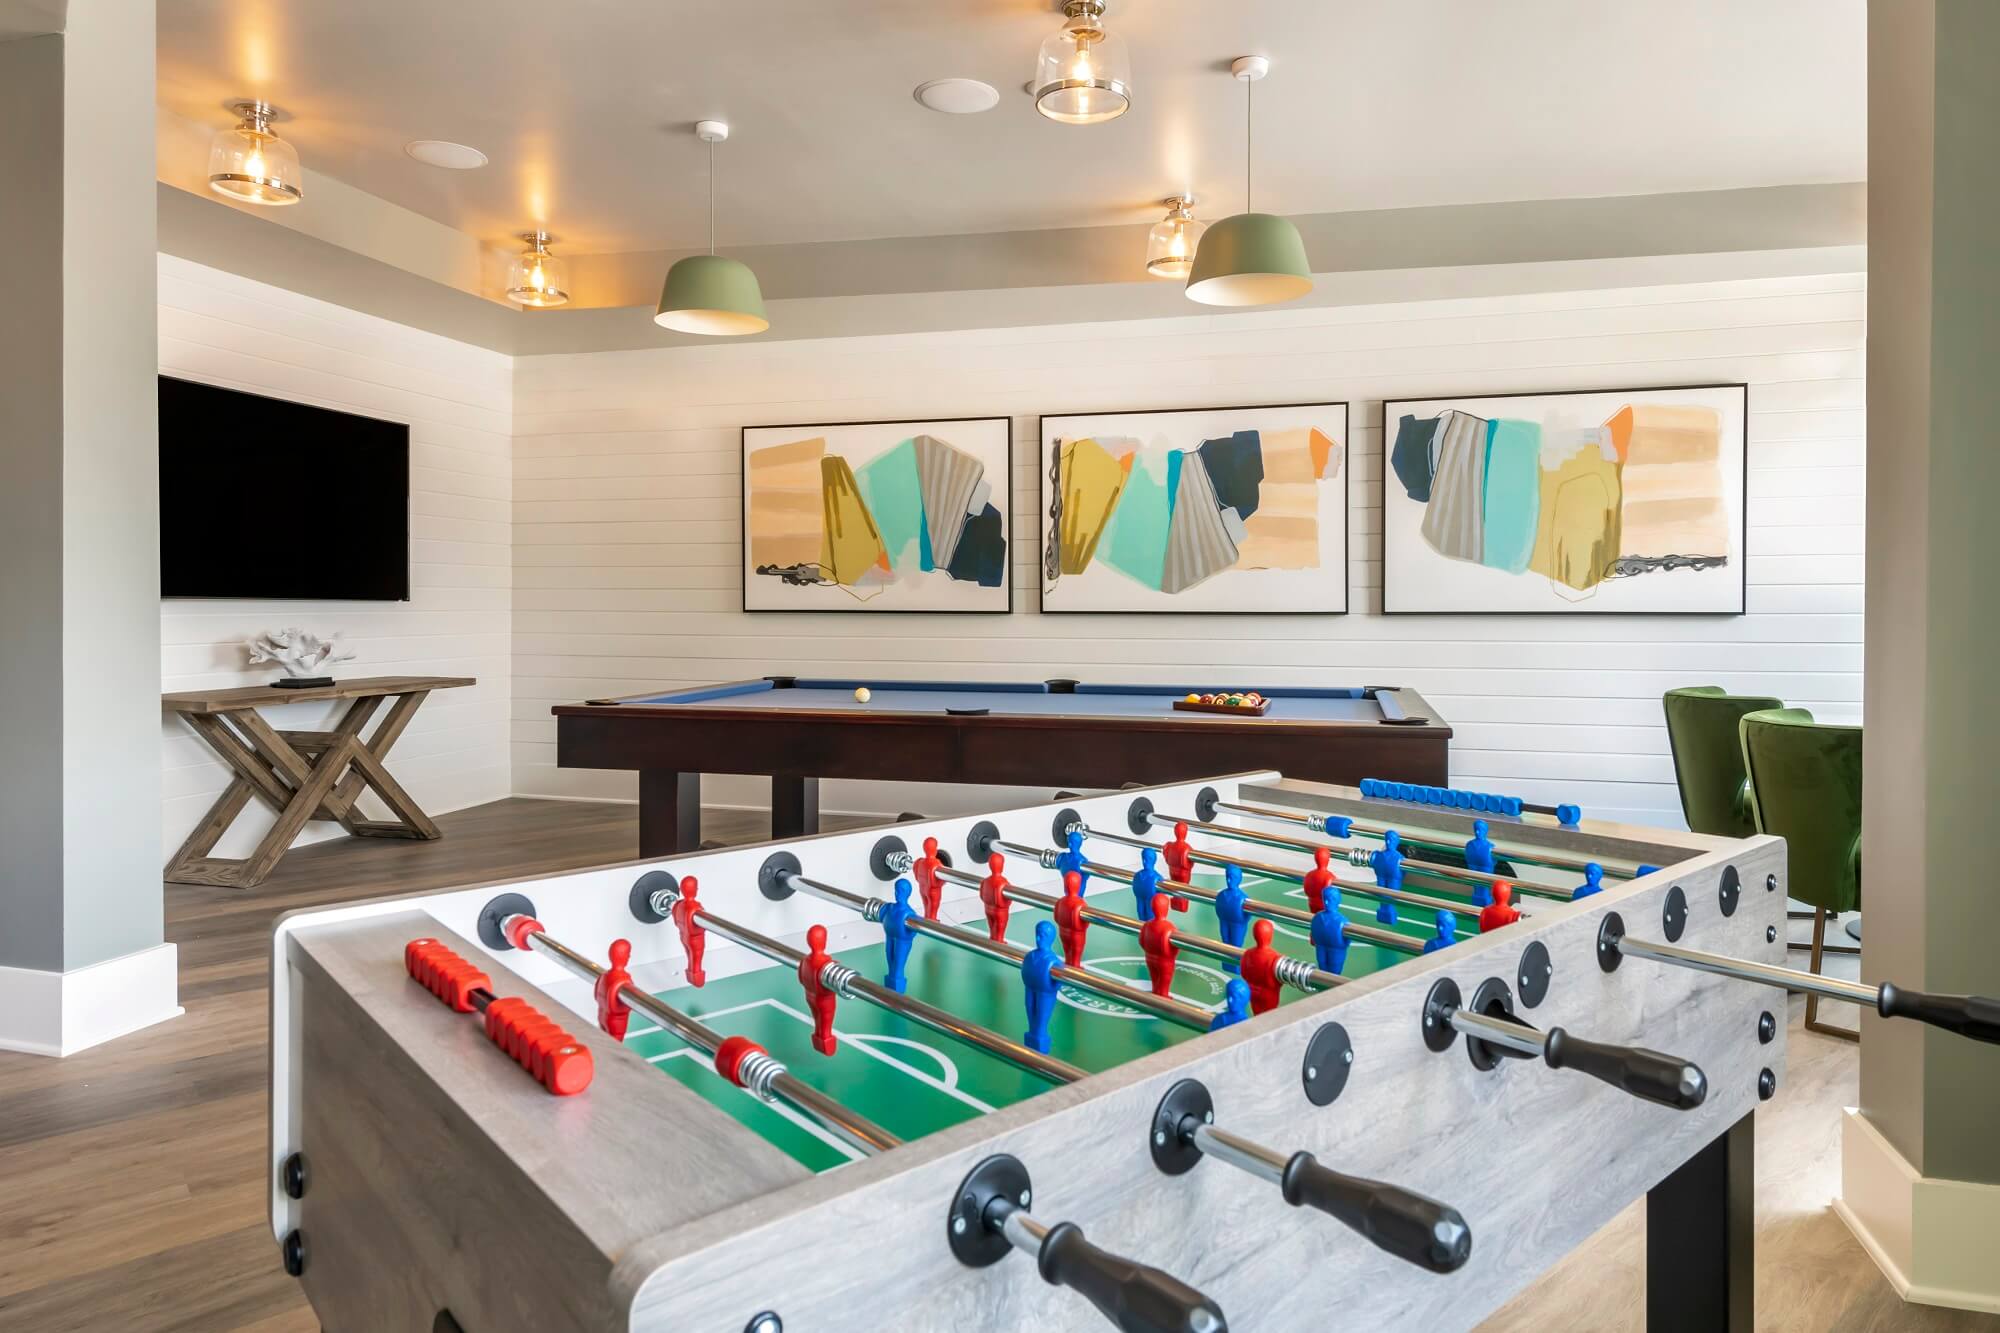 Clubhouse game room with foosball table, billiards, and TV